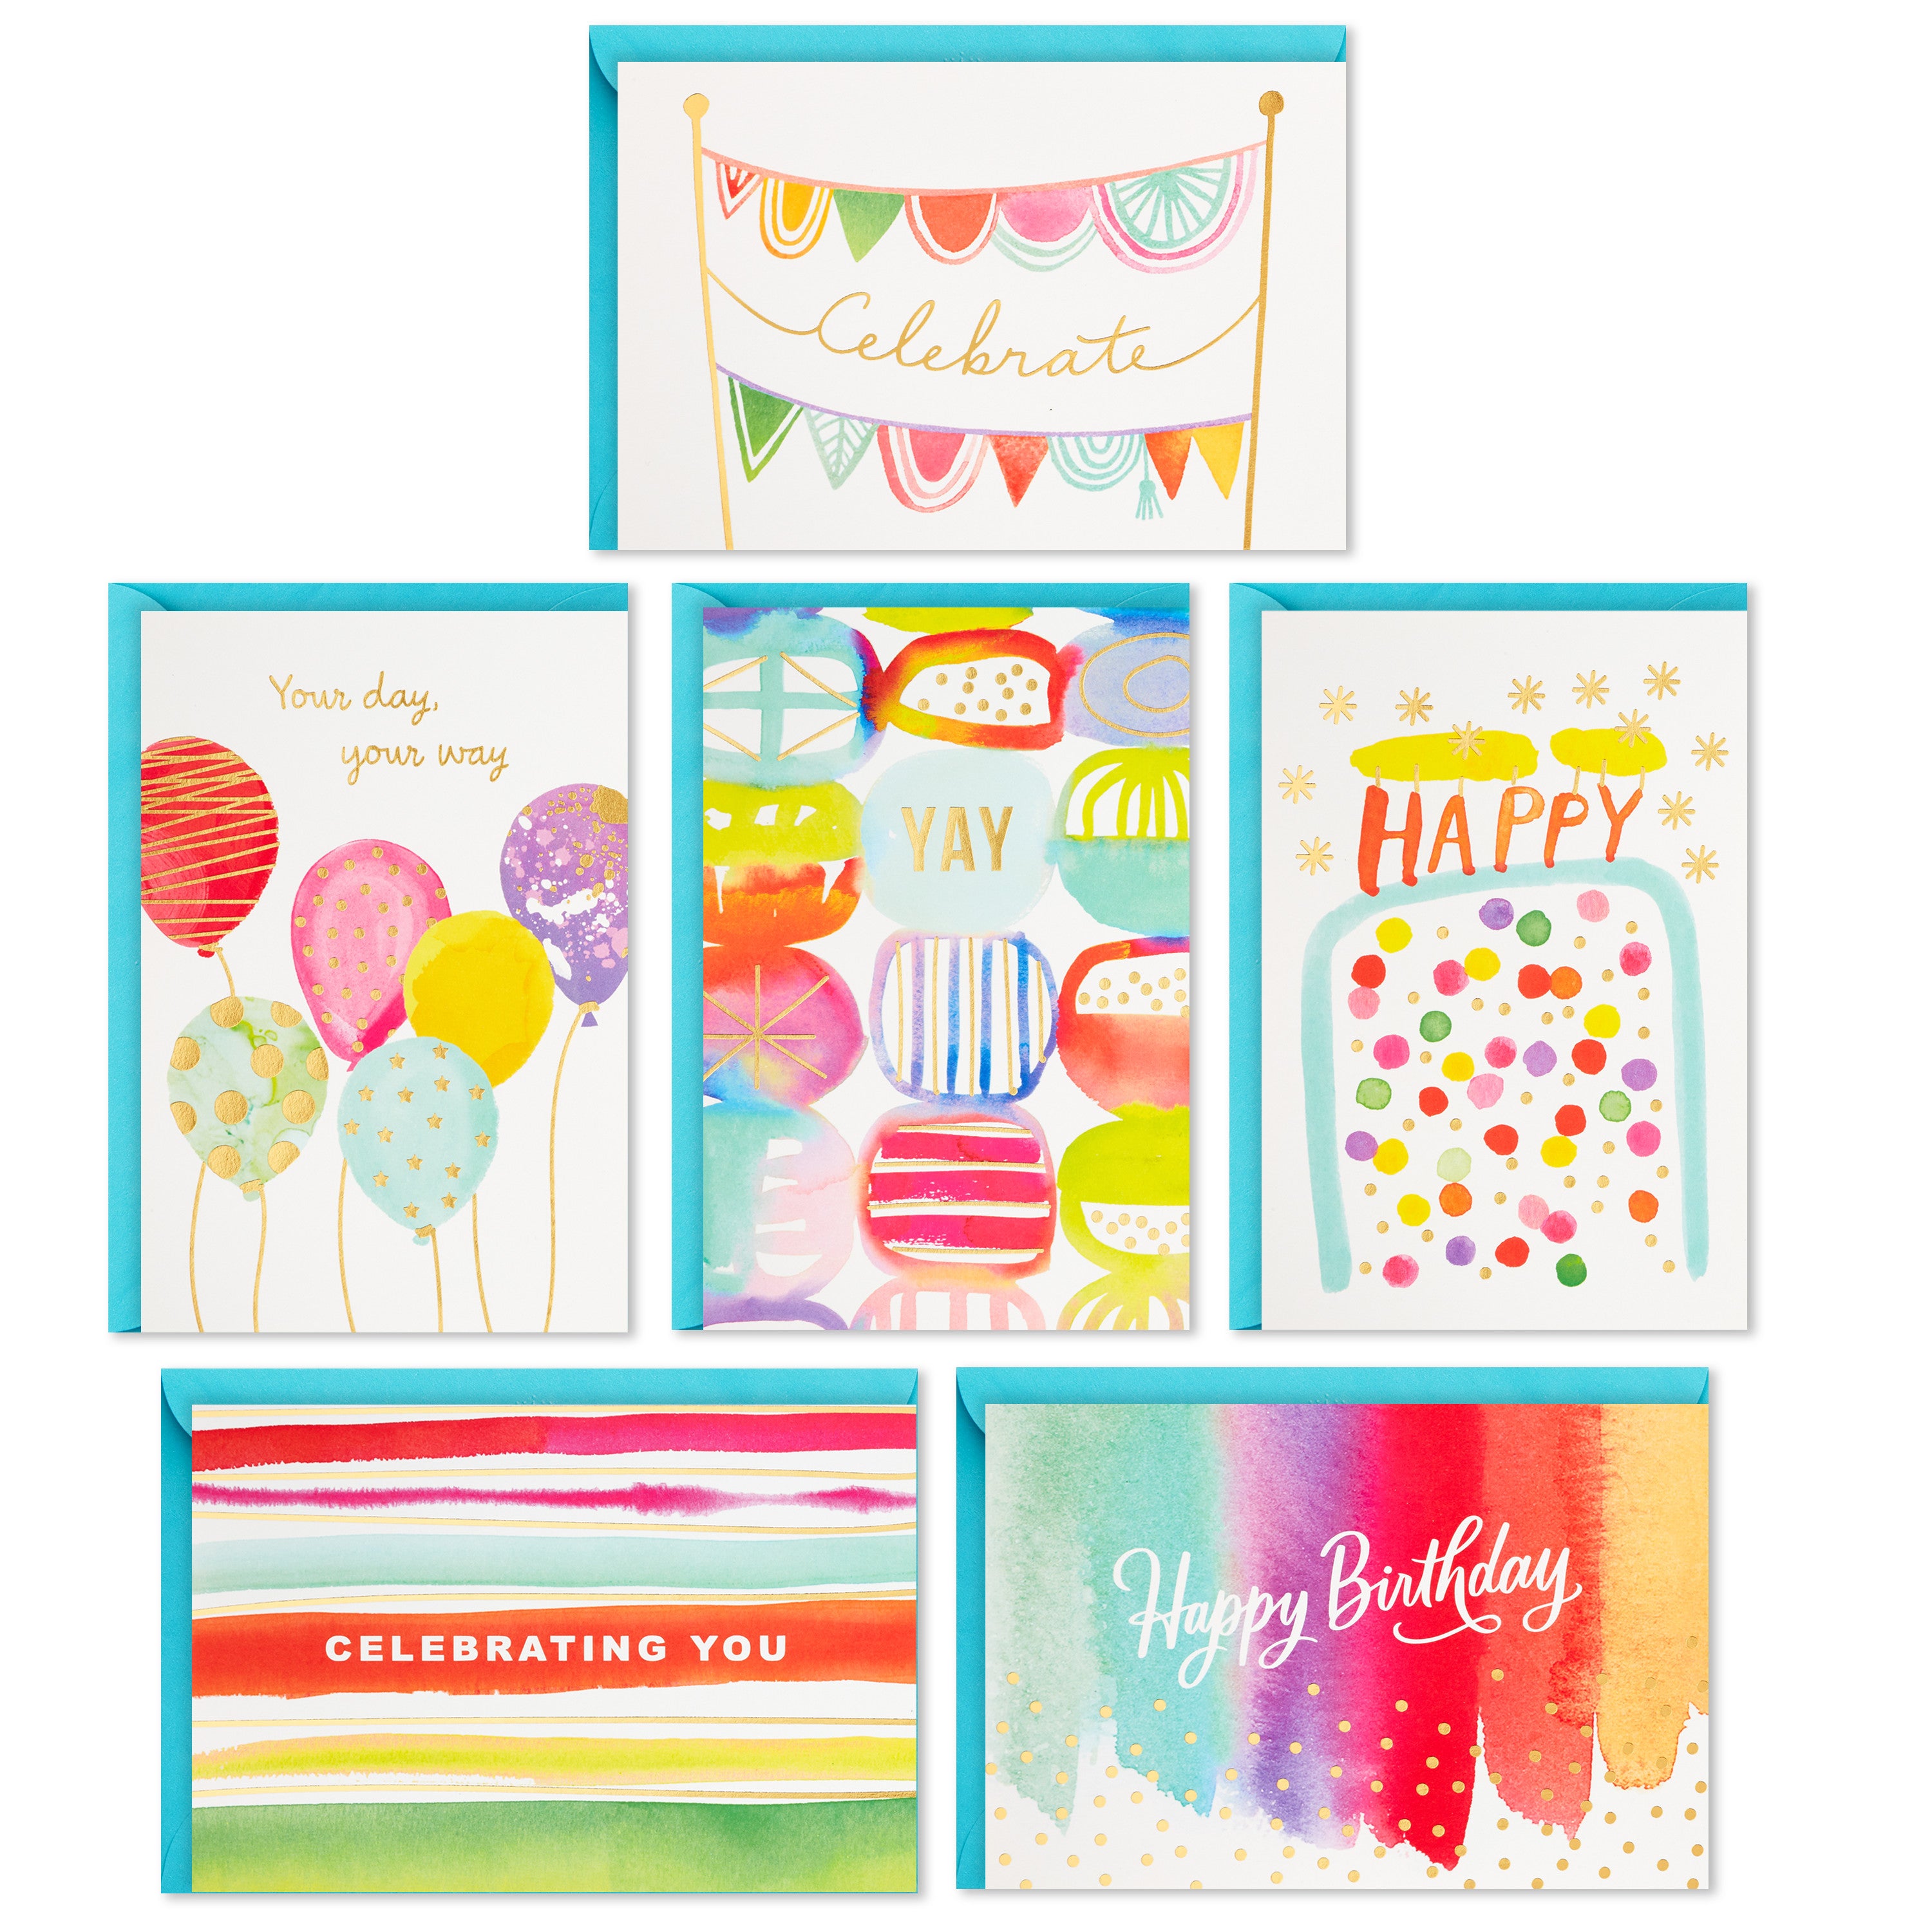 Birthday Cards Assortment, 36 Cards with Envelopes (Celebrate)